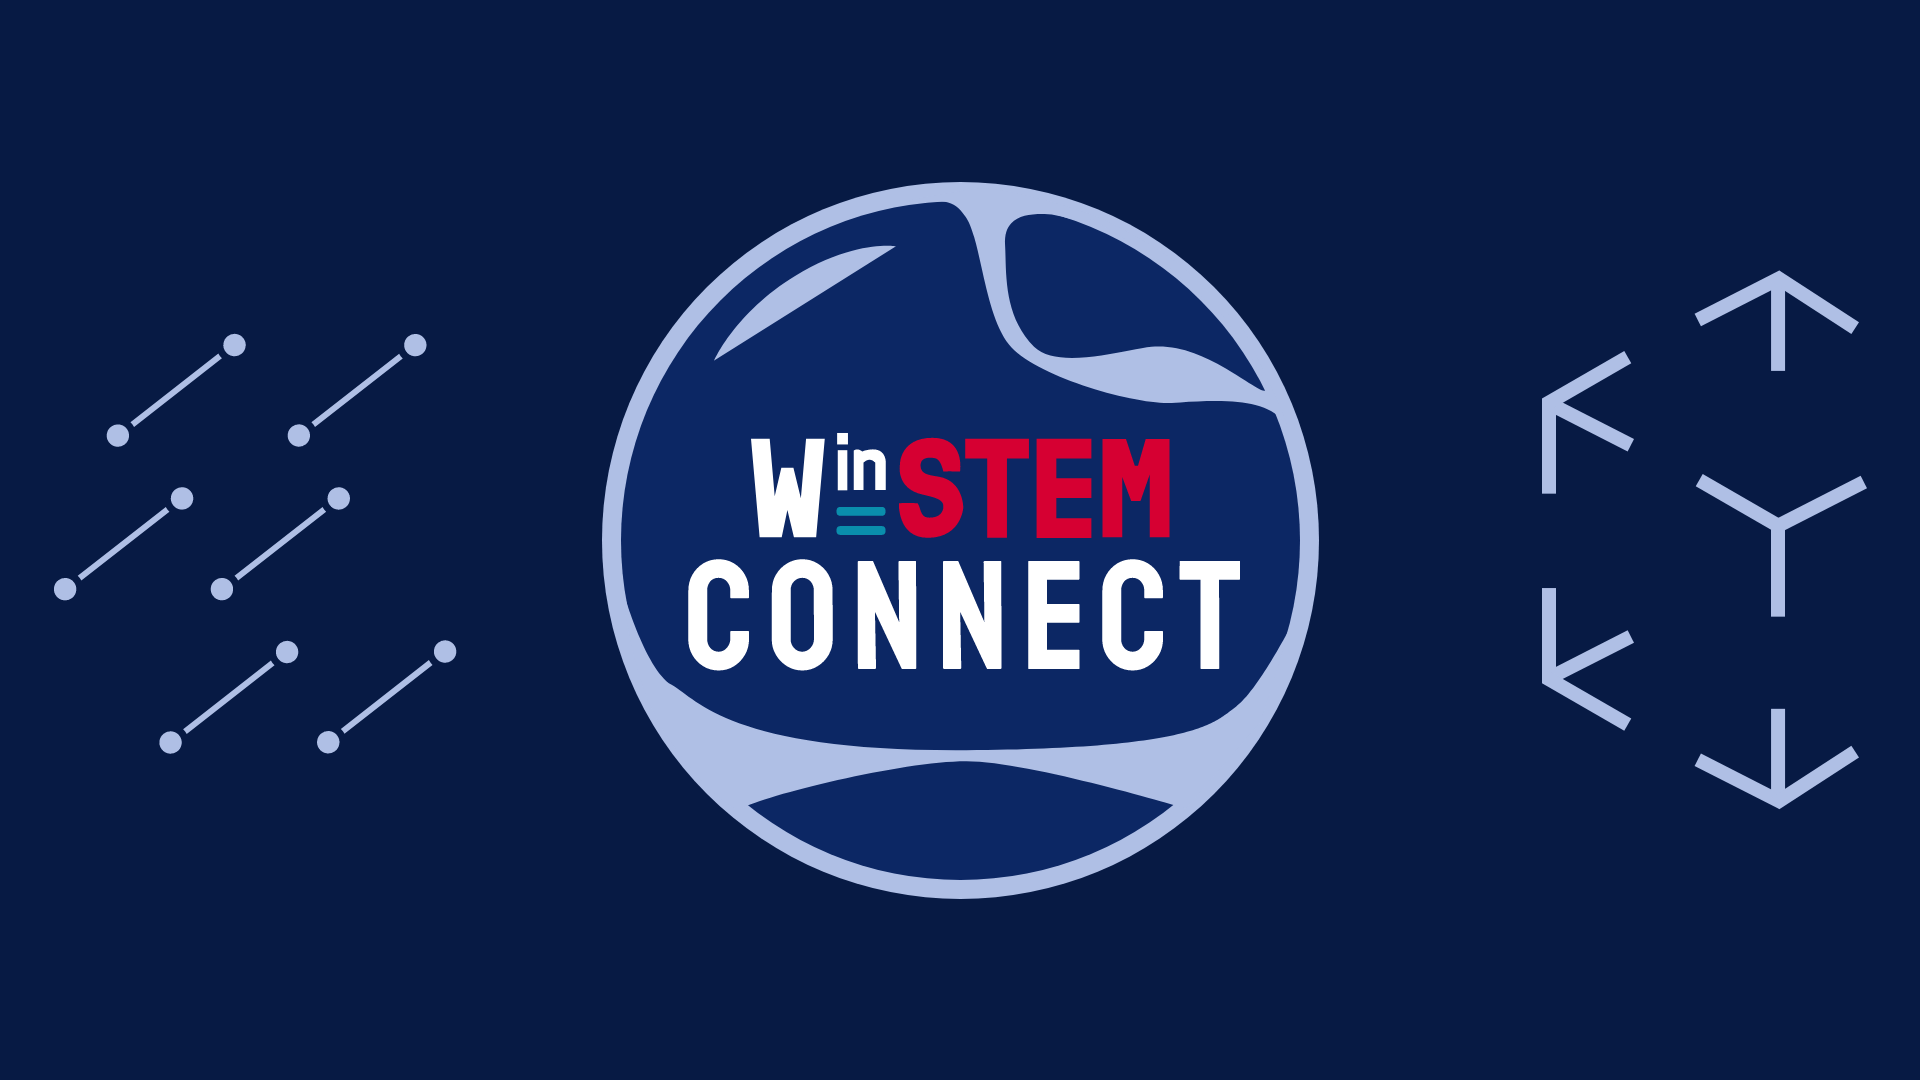 The Women in Stem Connect logo which consists of a two-tone light blue bubble on a dark blue background. The bubble contains the text W in Stem Connect in block capitals in white and red to match the Edinburgh University Women in Stem logo. On the left side of the bubble are some light blue dots connected by diagonal lines and on the right are light blue shapes forming the corners of a cube.